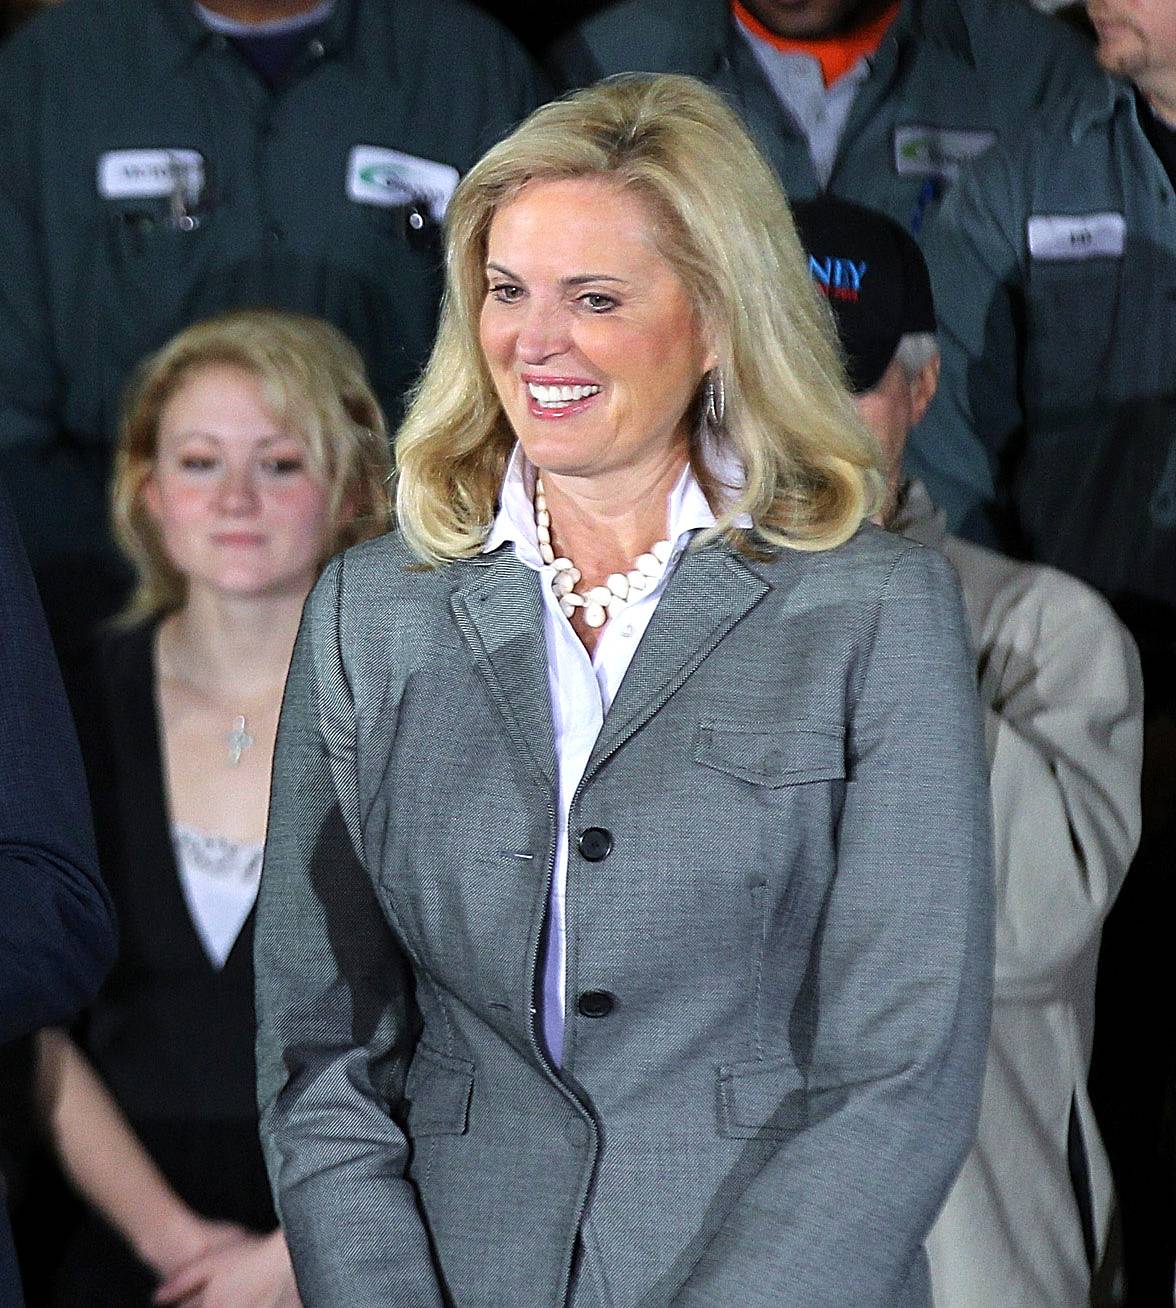 Ann Romney - “I don’t even consider myself wealthy, which is an interesting thing. It can be here today and gone tomorrow,” said Ann Romney, wife of the extremely wealthy GOP presidential frontrunner Mitt Romney, in a Fox News interview.(Photo: Justin Sullivan/Getty Images)